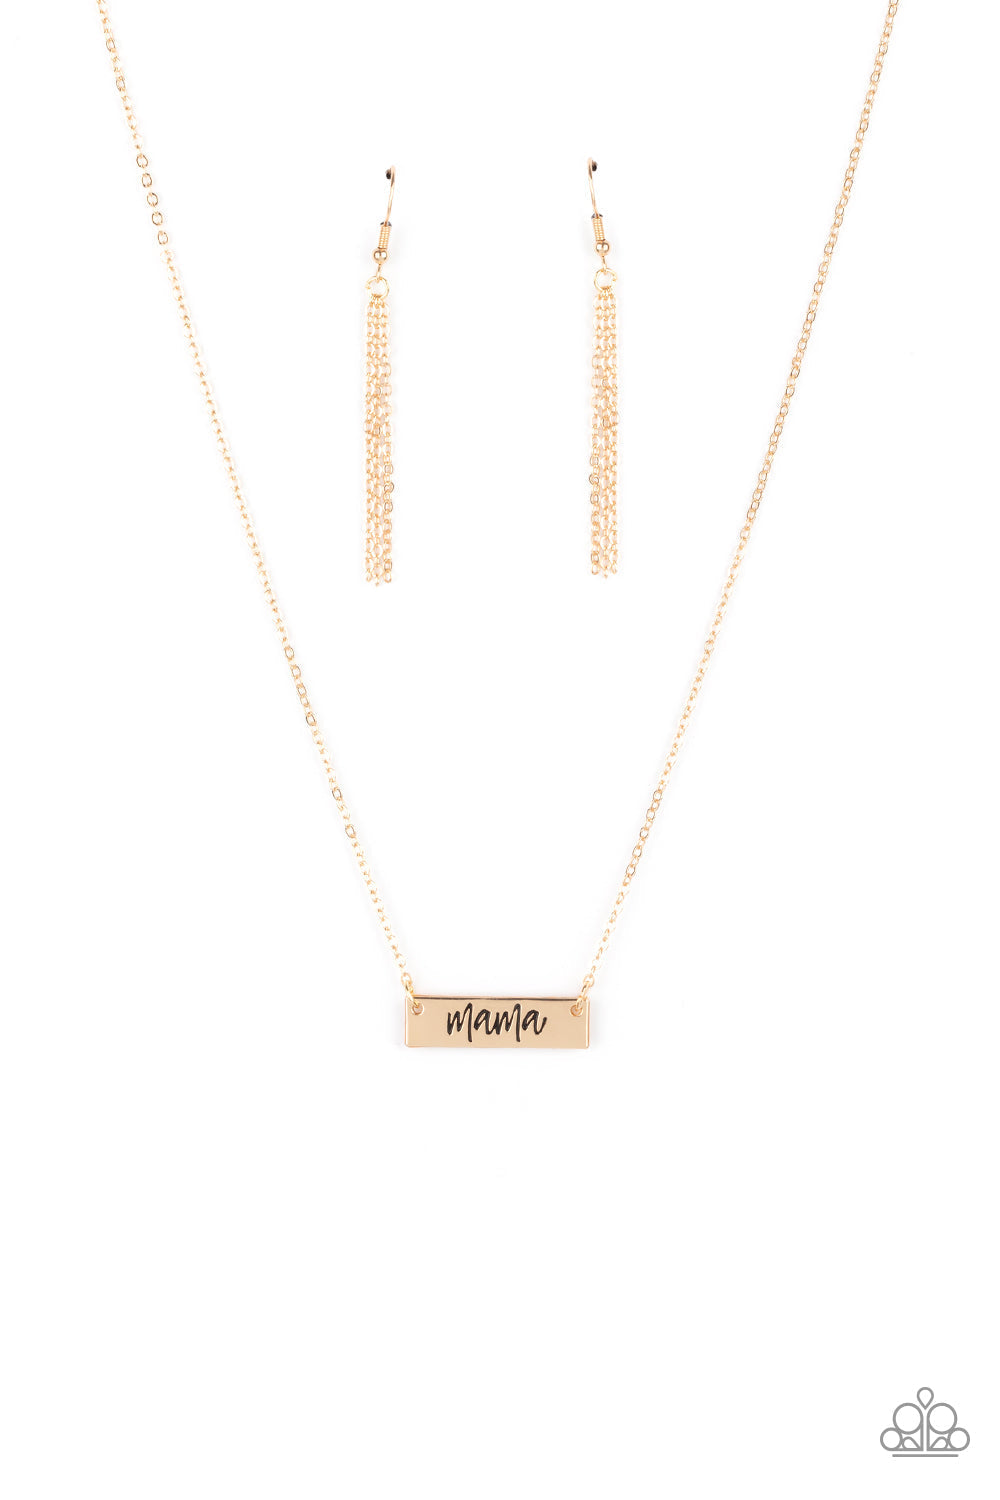 Mama Gold Necklace | The perfect way to say 'I love you' without words |  Nanda Jewelry